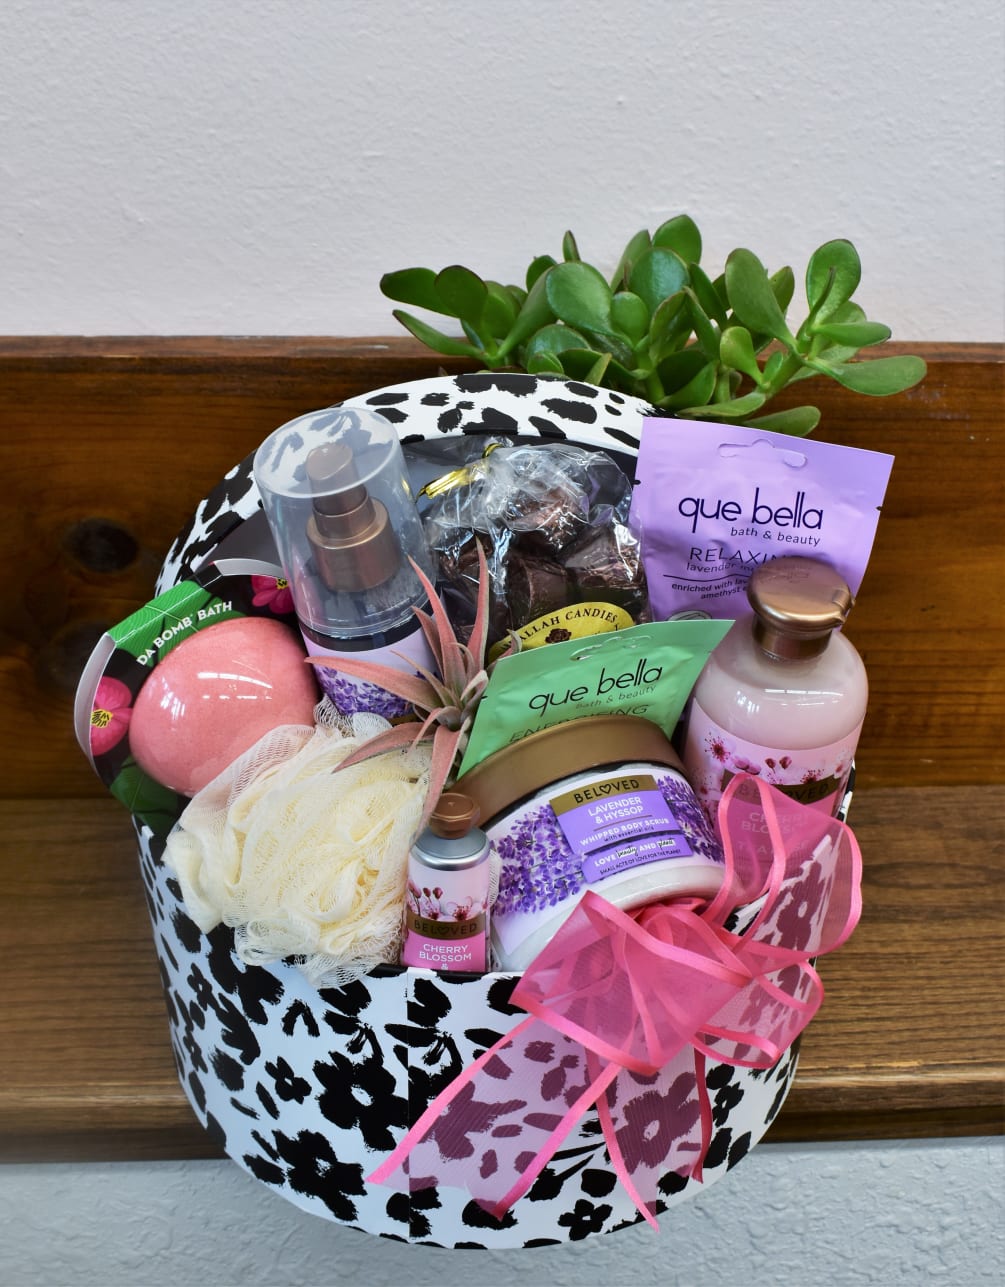 Treat someone to a relaxing treat! A gift basket filled with all